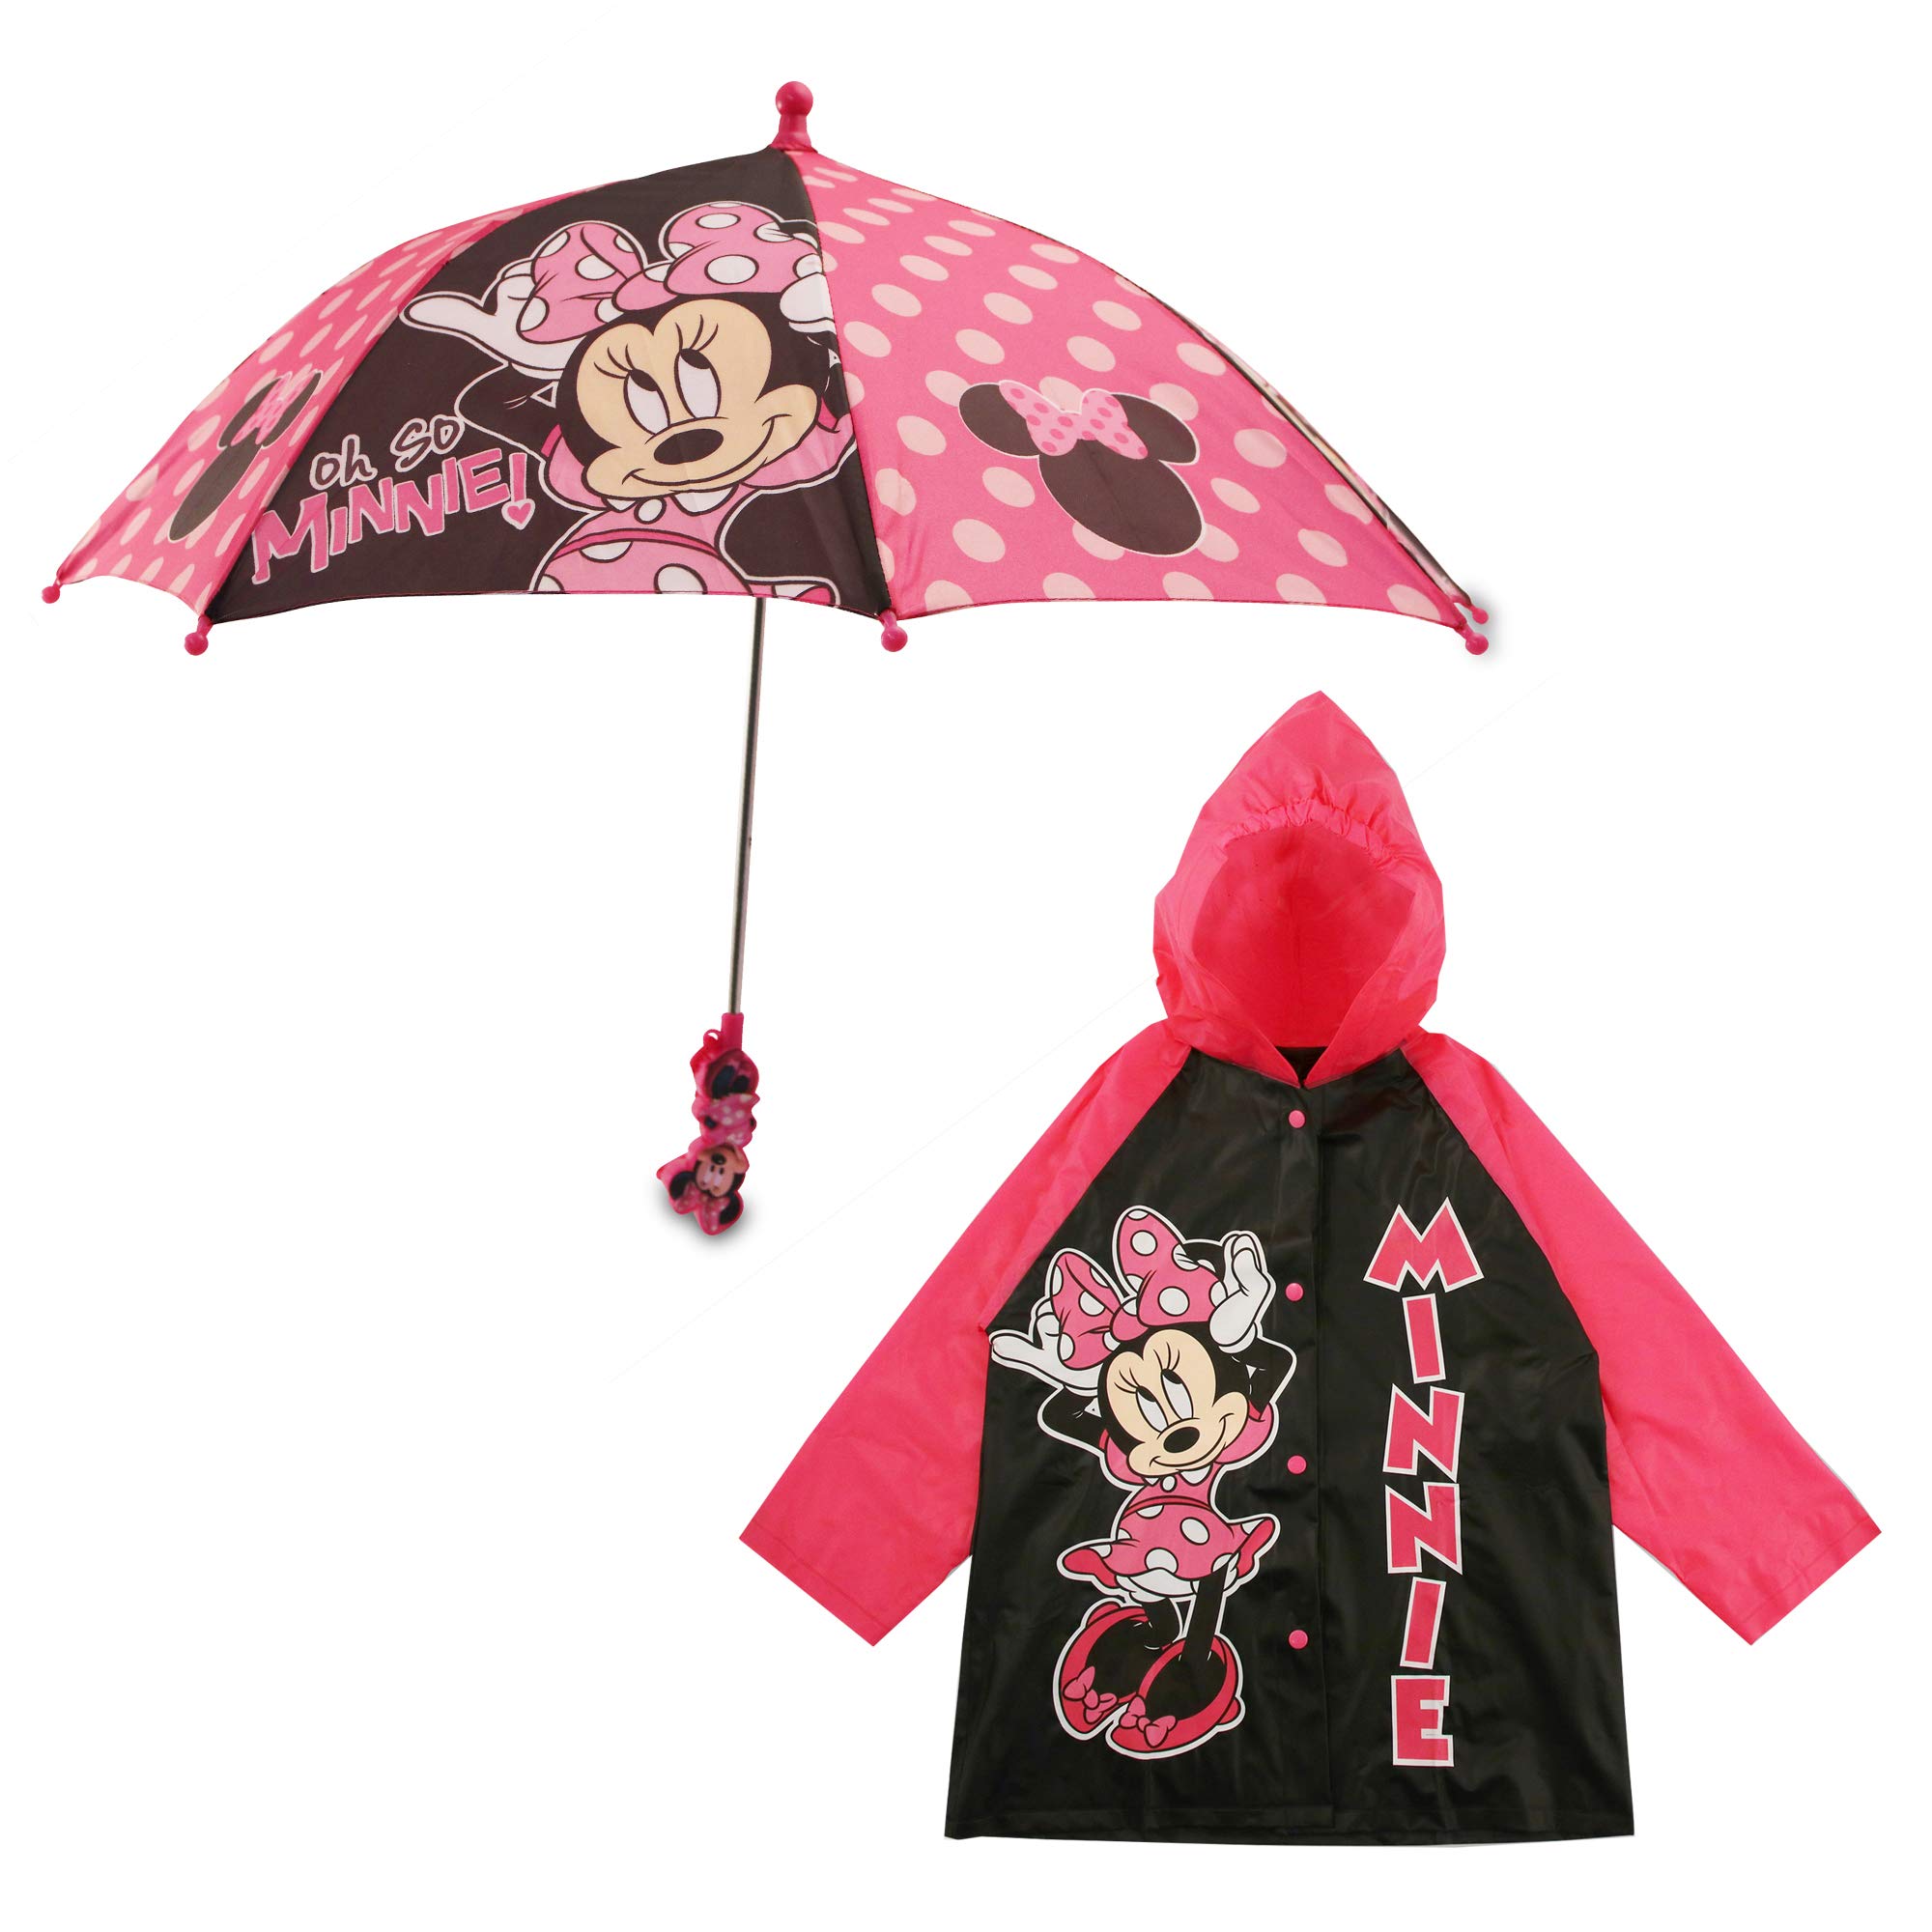 Disney Minnie Mouse Kids Umbrella with Matching Rain Poncho for Girls Ages 2-7 - image 1 of 8